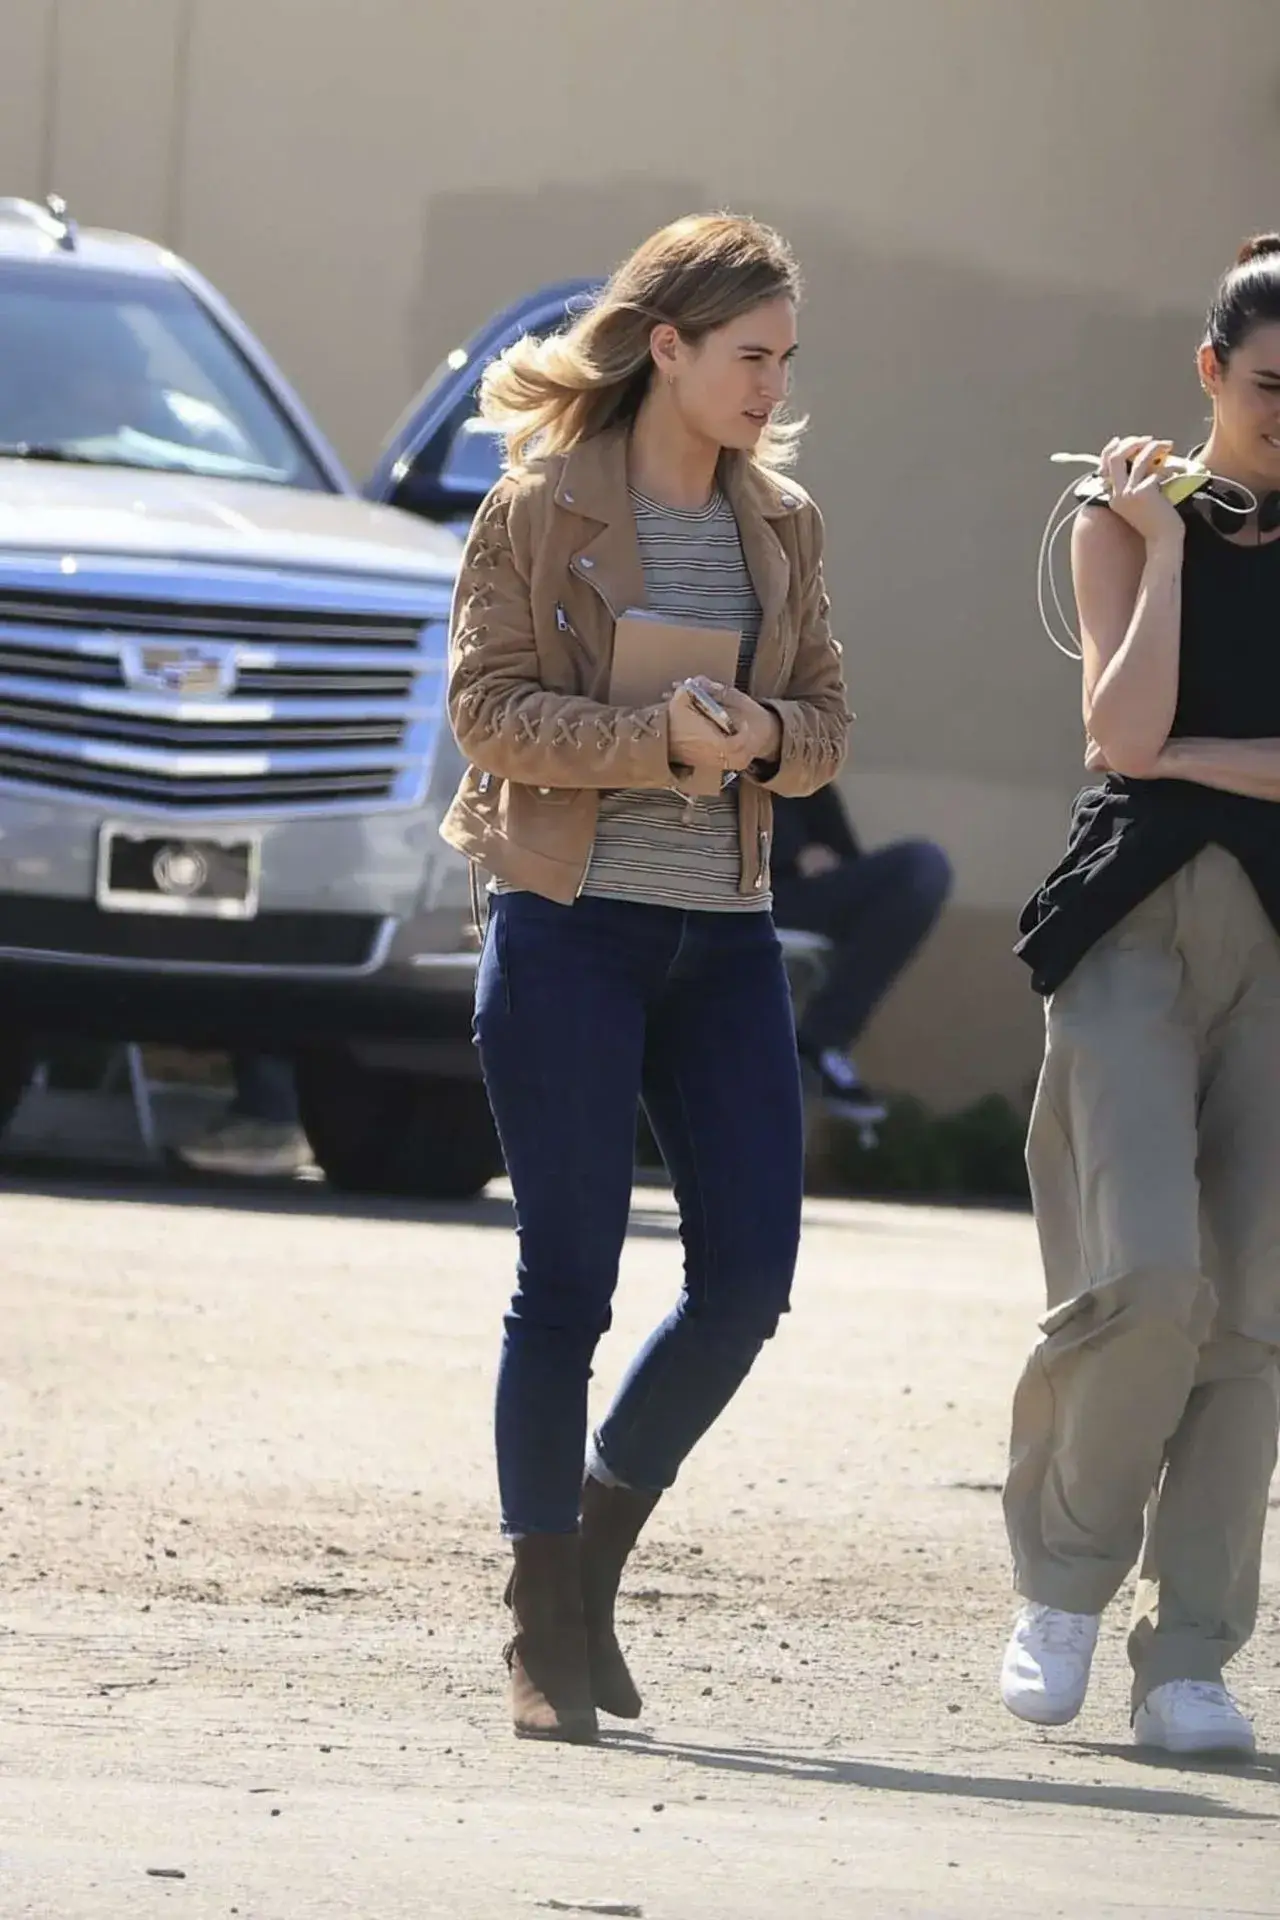 LILY JAMES STILLS ON SET IN LA CONTINUING HER WORK ON THE FILM SWIPED 6